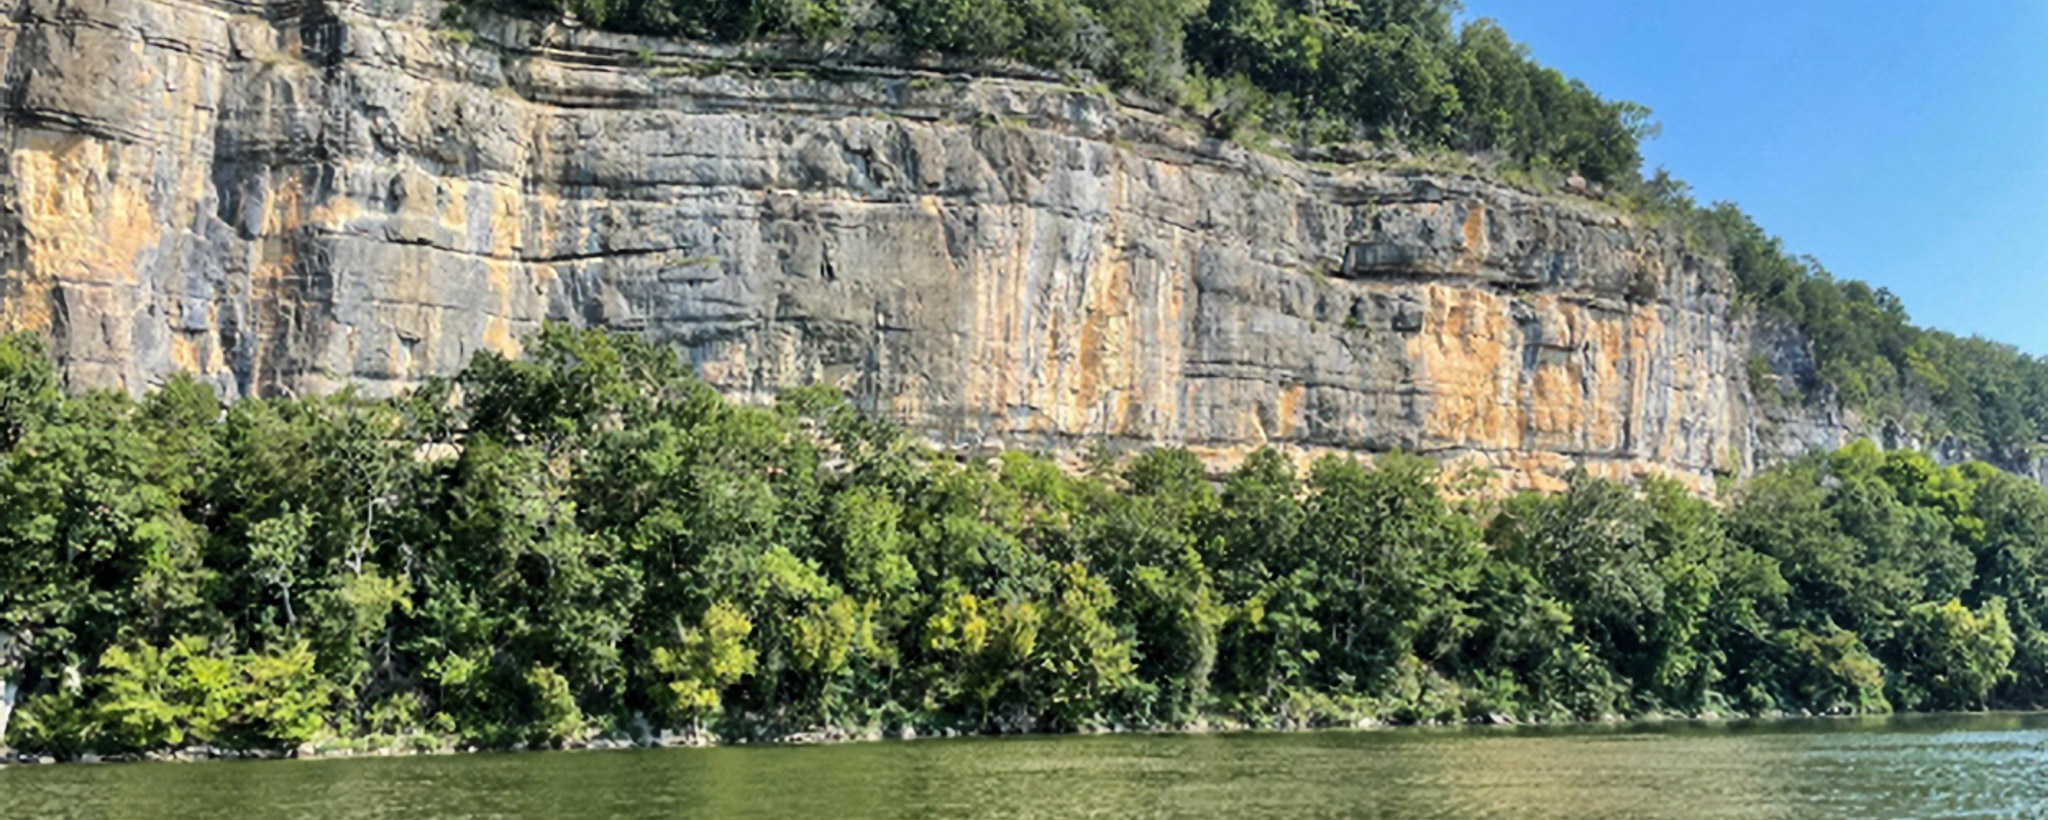 As visitors approach the Painted Bluff site, they have a beautiful view from the water